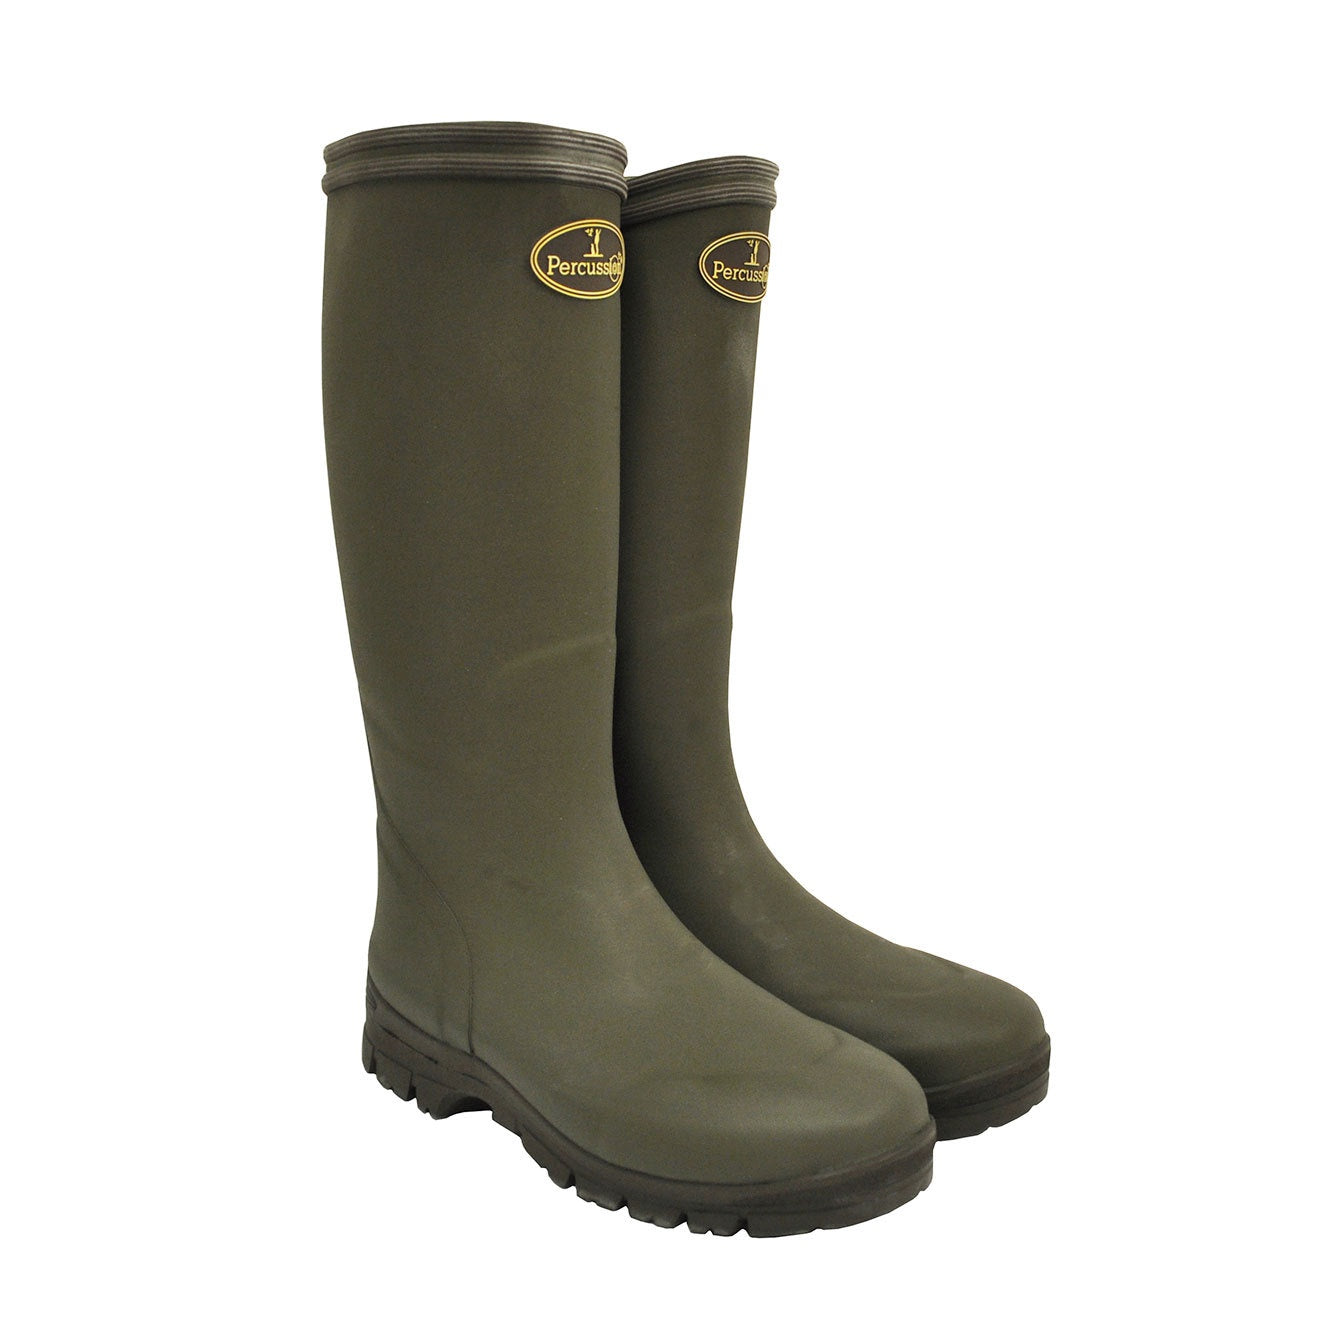 Percussion Marly Full Wellington Boot